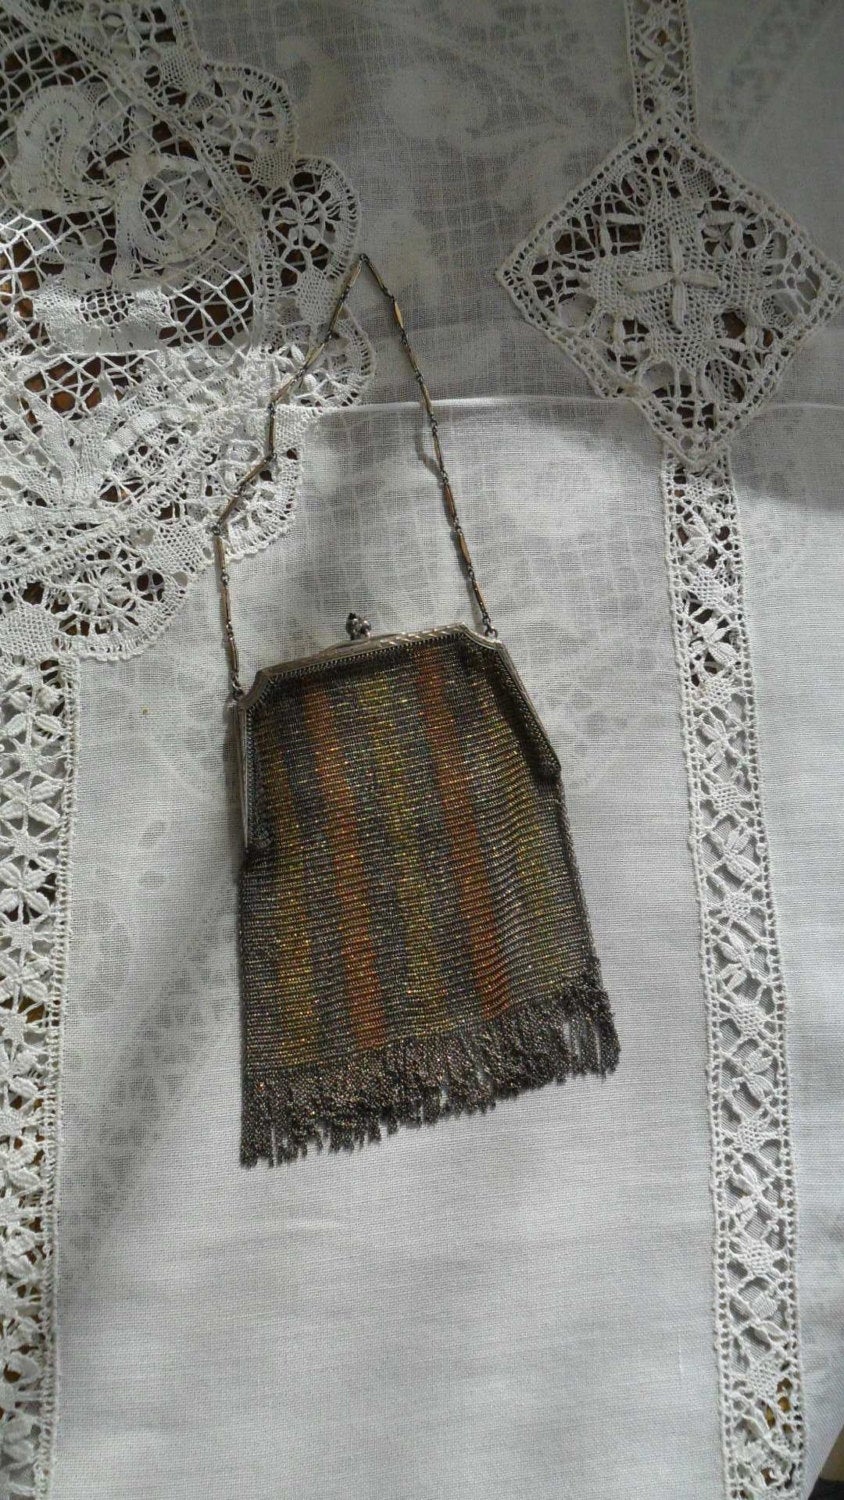 Wedding - Antique Sterling Silver and Gold Mesh Whiting and Davis Bag Purse 1900 1920 Wedding Purse